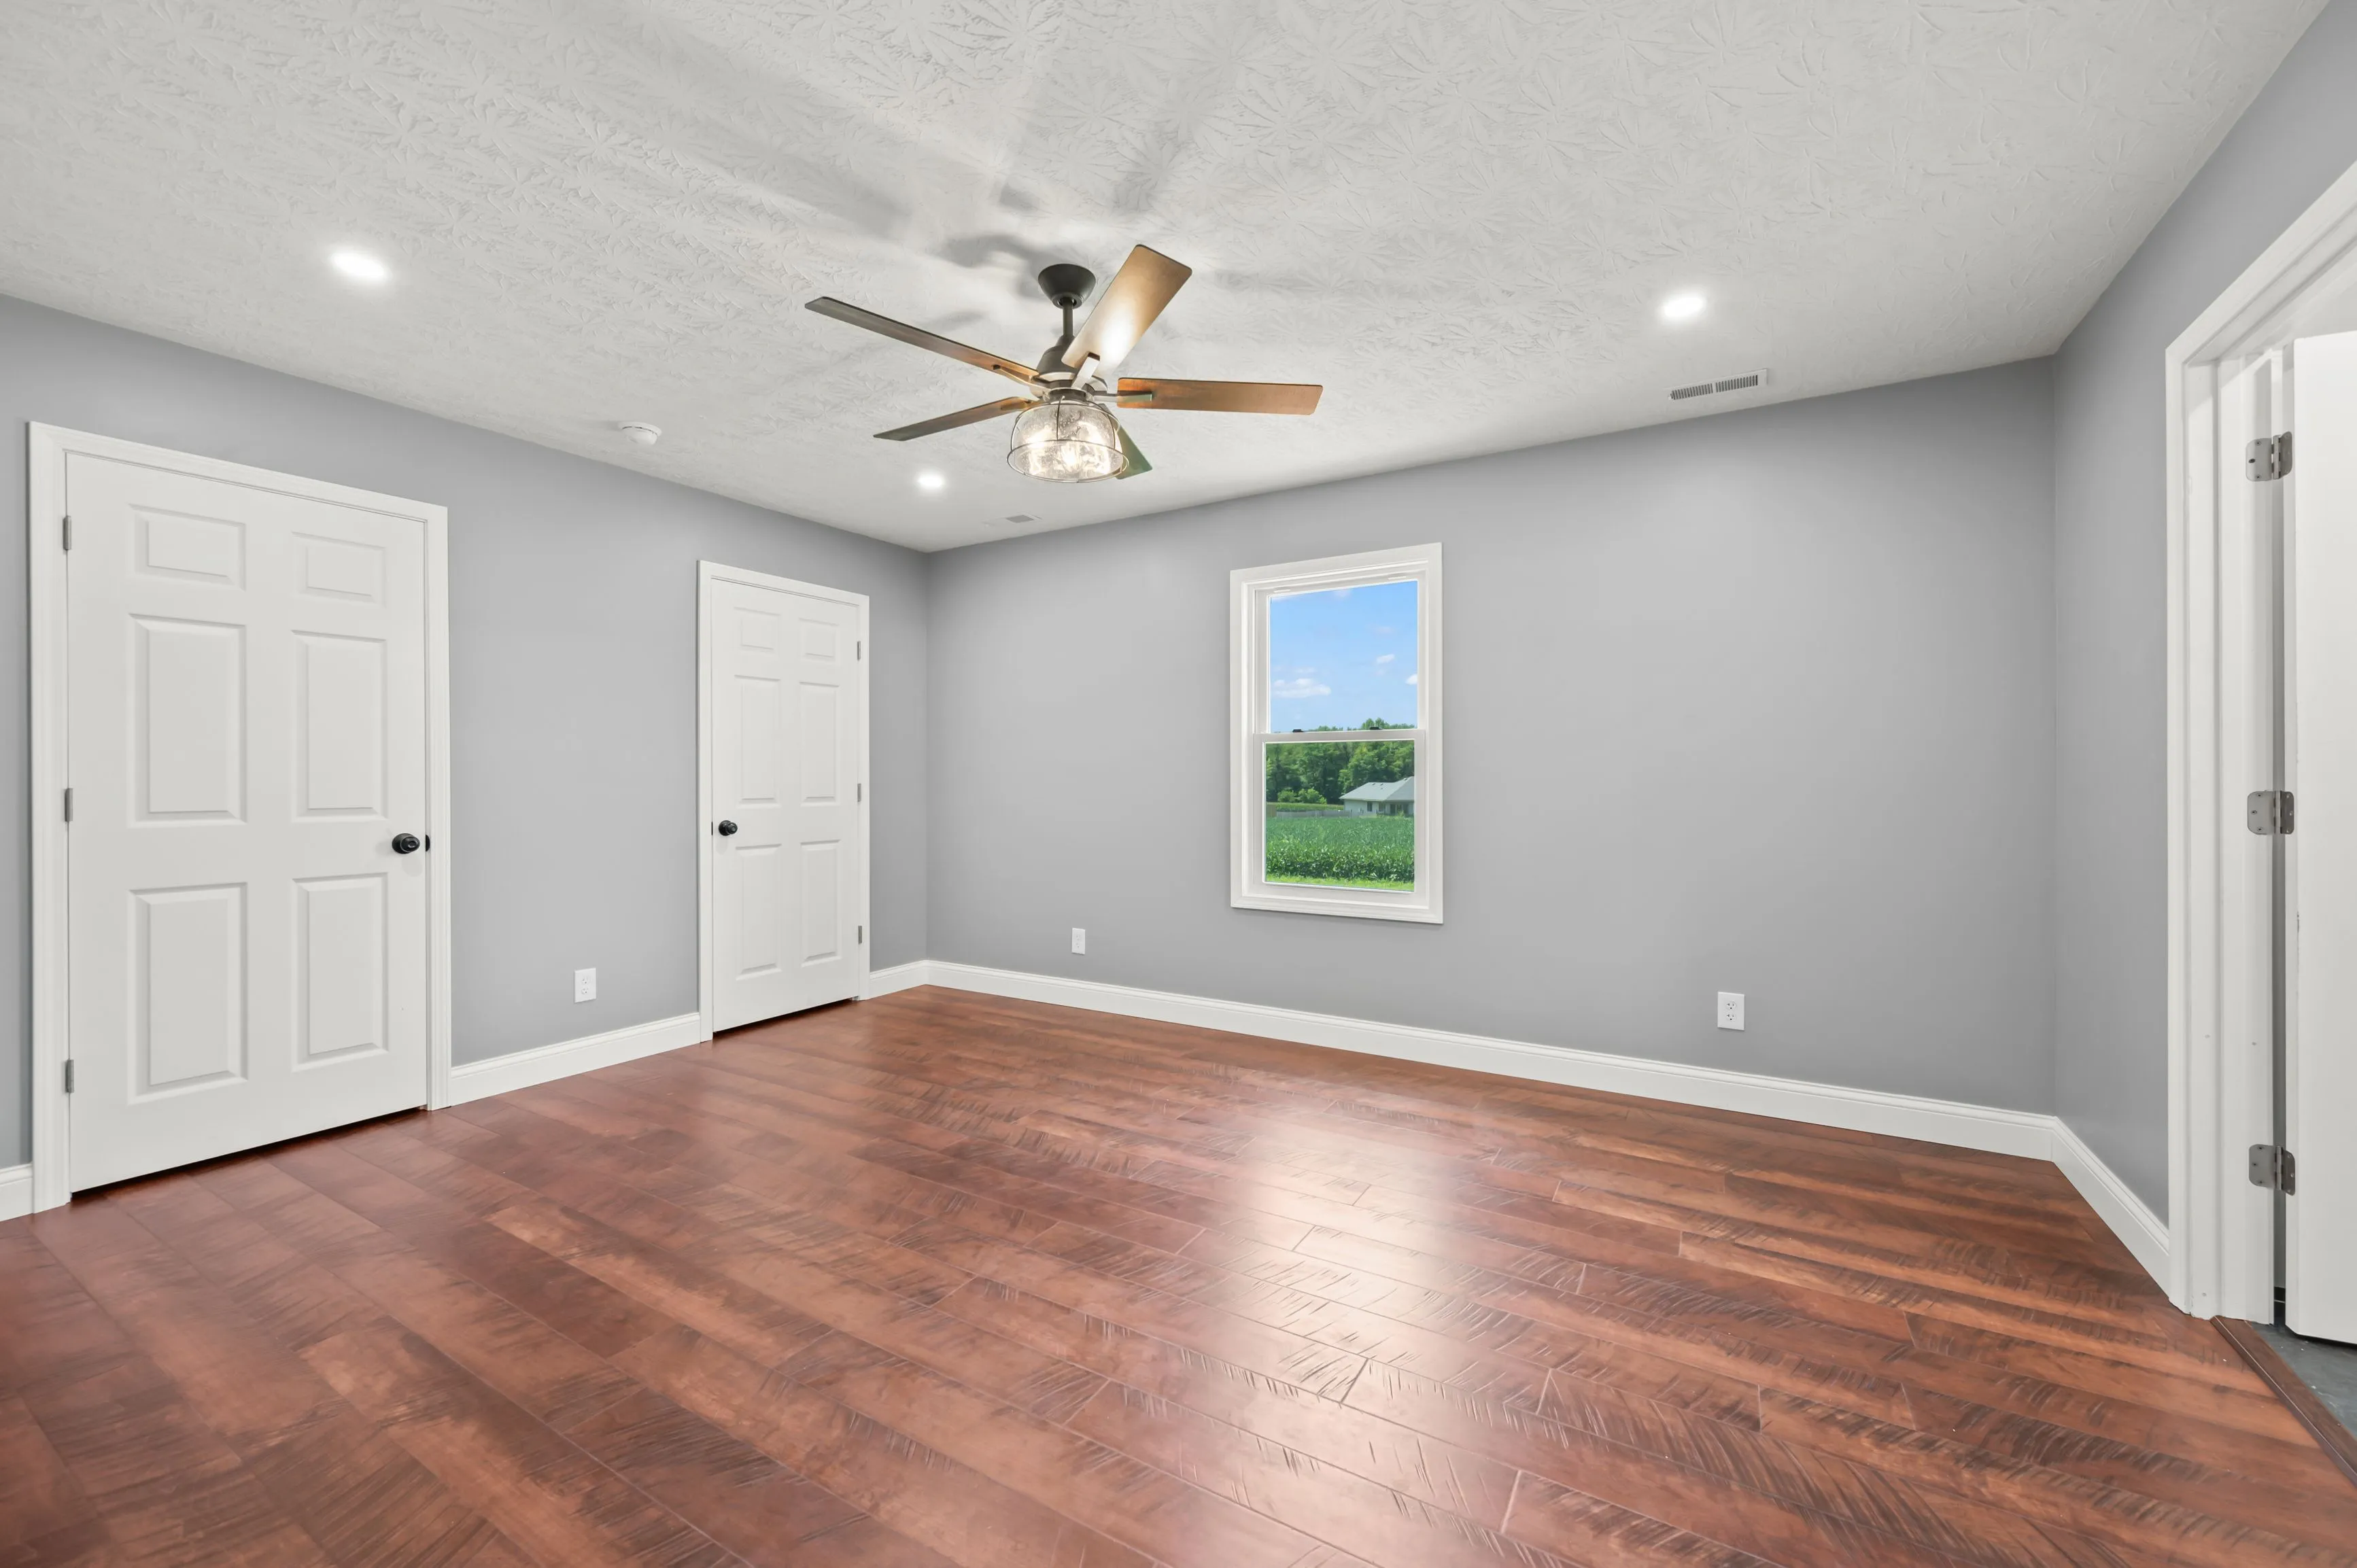 Bright empty room with gray walls, wooden floor, ceiling fan, recessed lighting, and a window with a view of greenery outside.